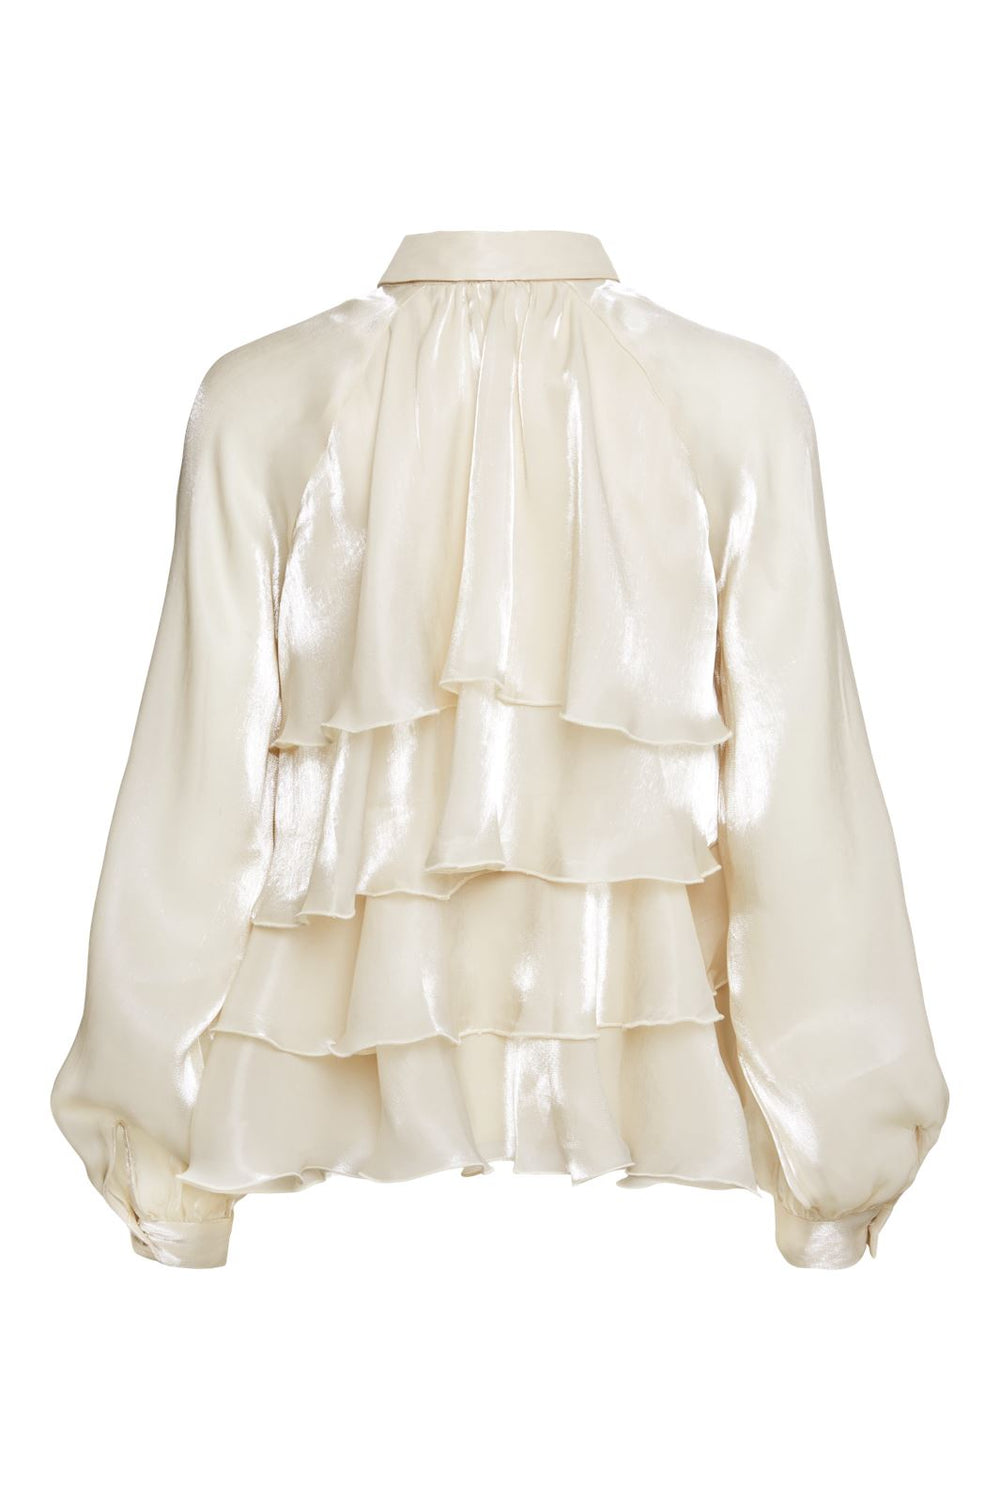 Y.A.S - Yaseloise Ls Shiny Top - 4596084 Pearled Ivory